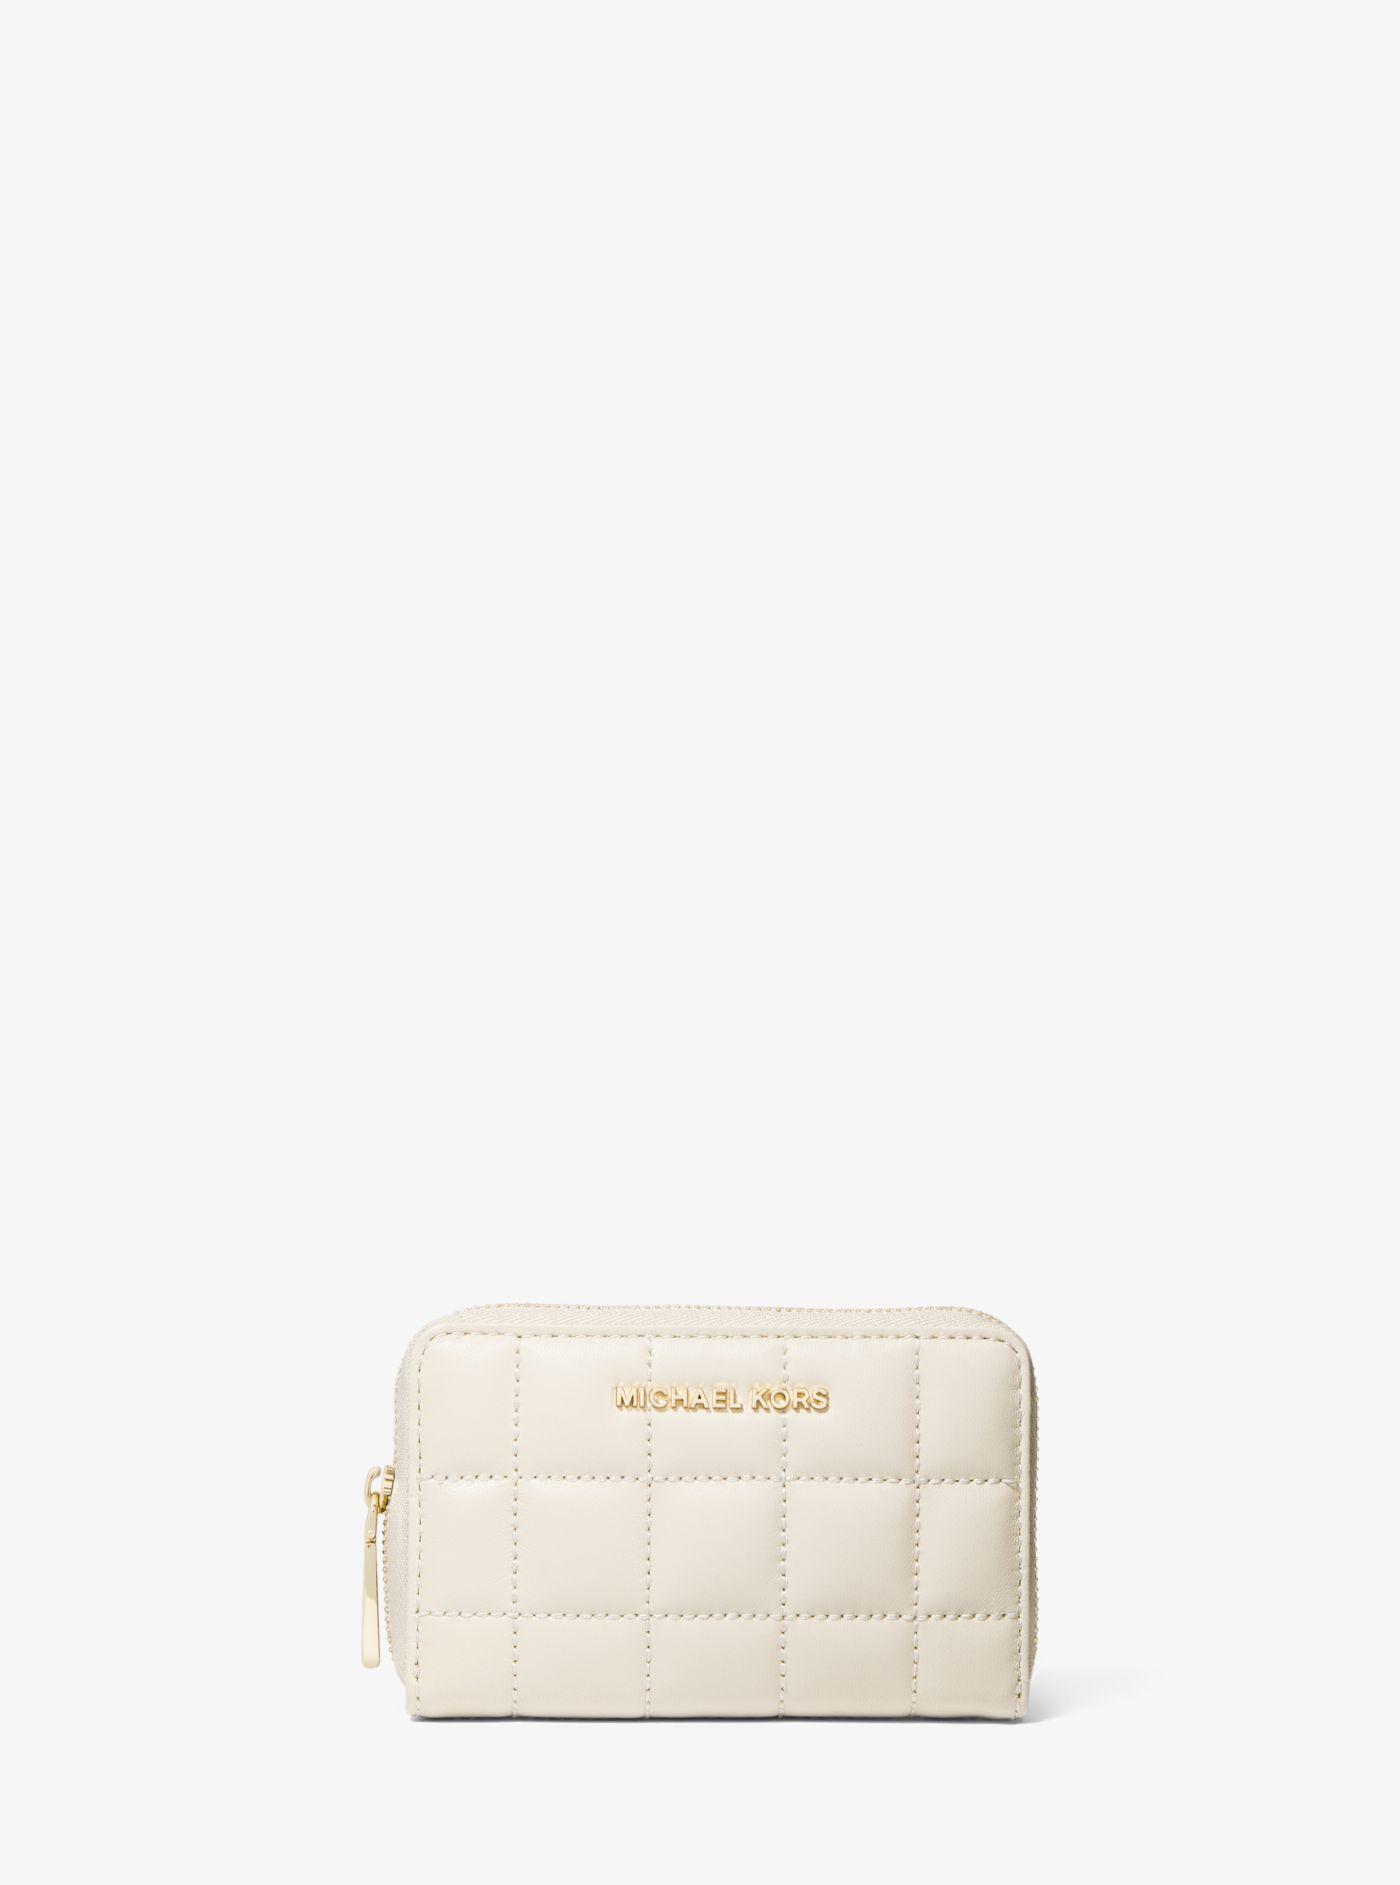 michael kors wallet quilted